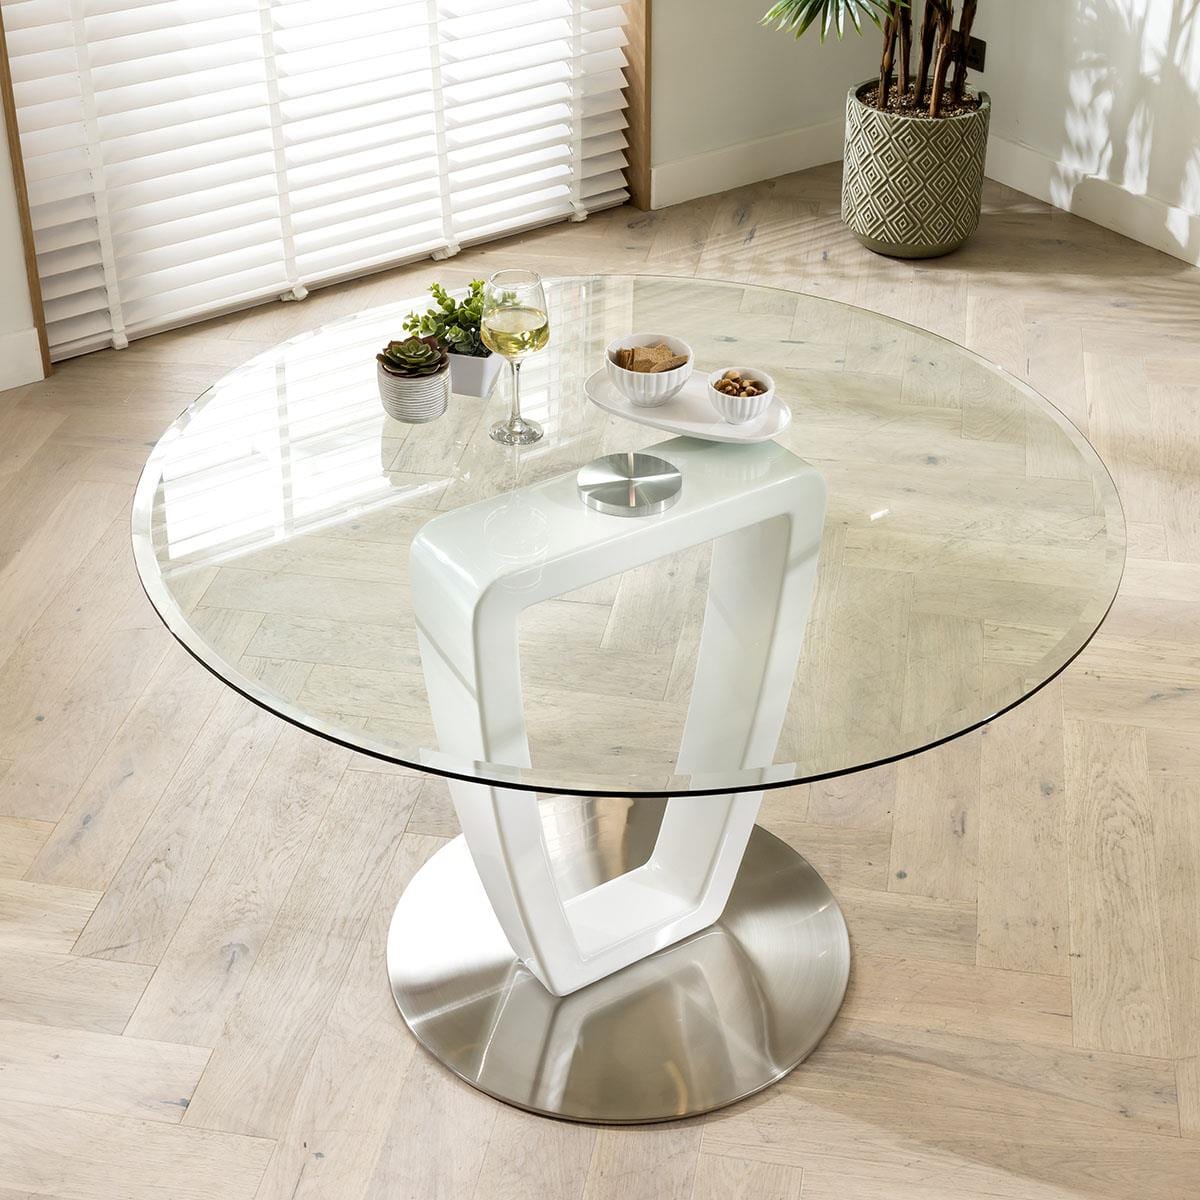 Quatropi Modern 1.2m Round Clear Glass Dining Table. Stainless steel Base. New